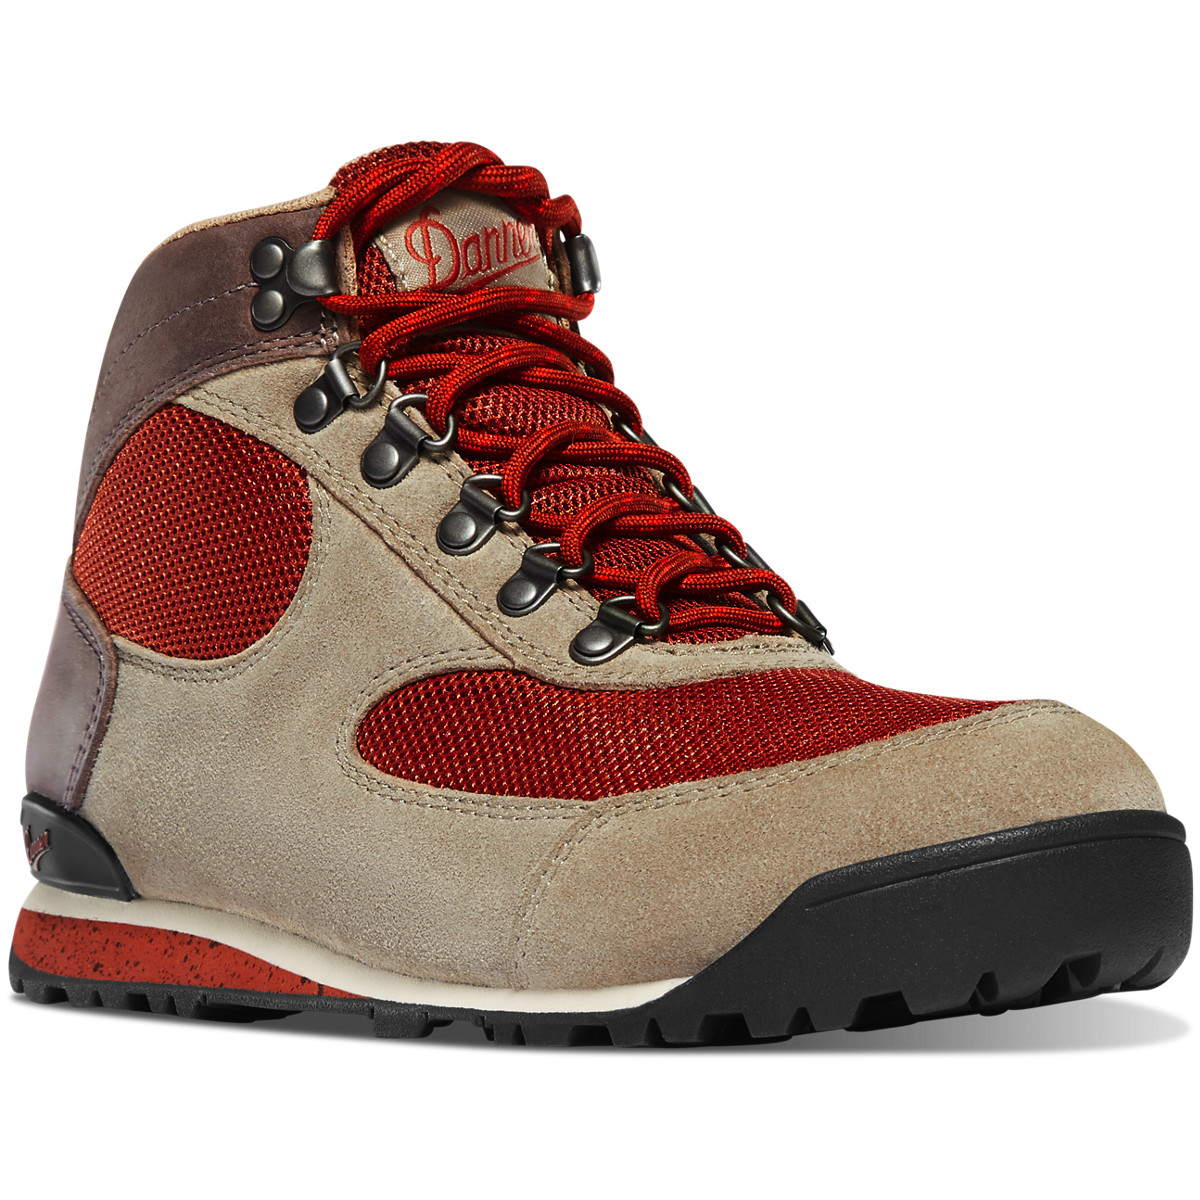 Danner Womens Jag Dry Weather Hiking Boots Khaki/Red - YKX926718